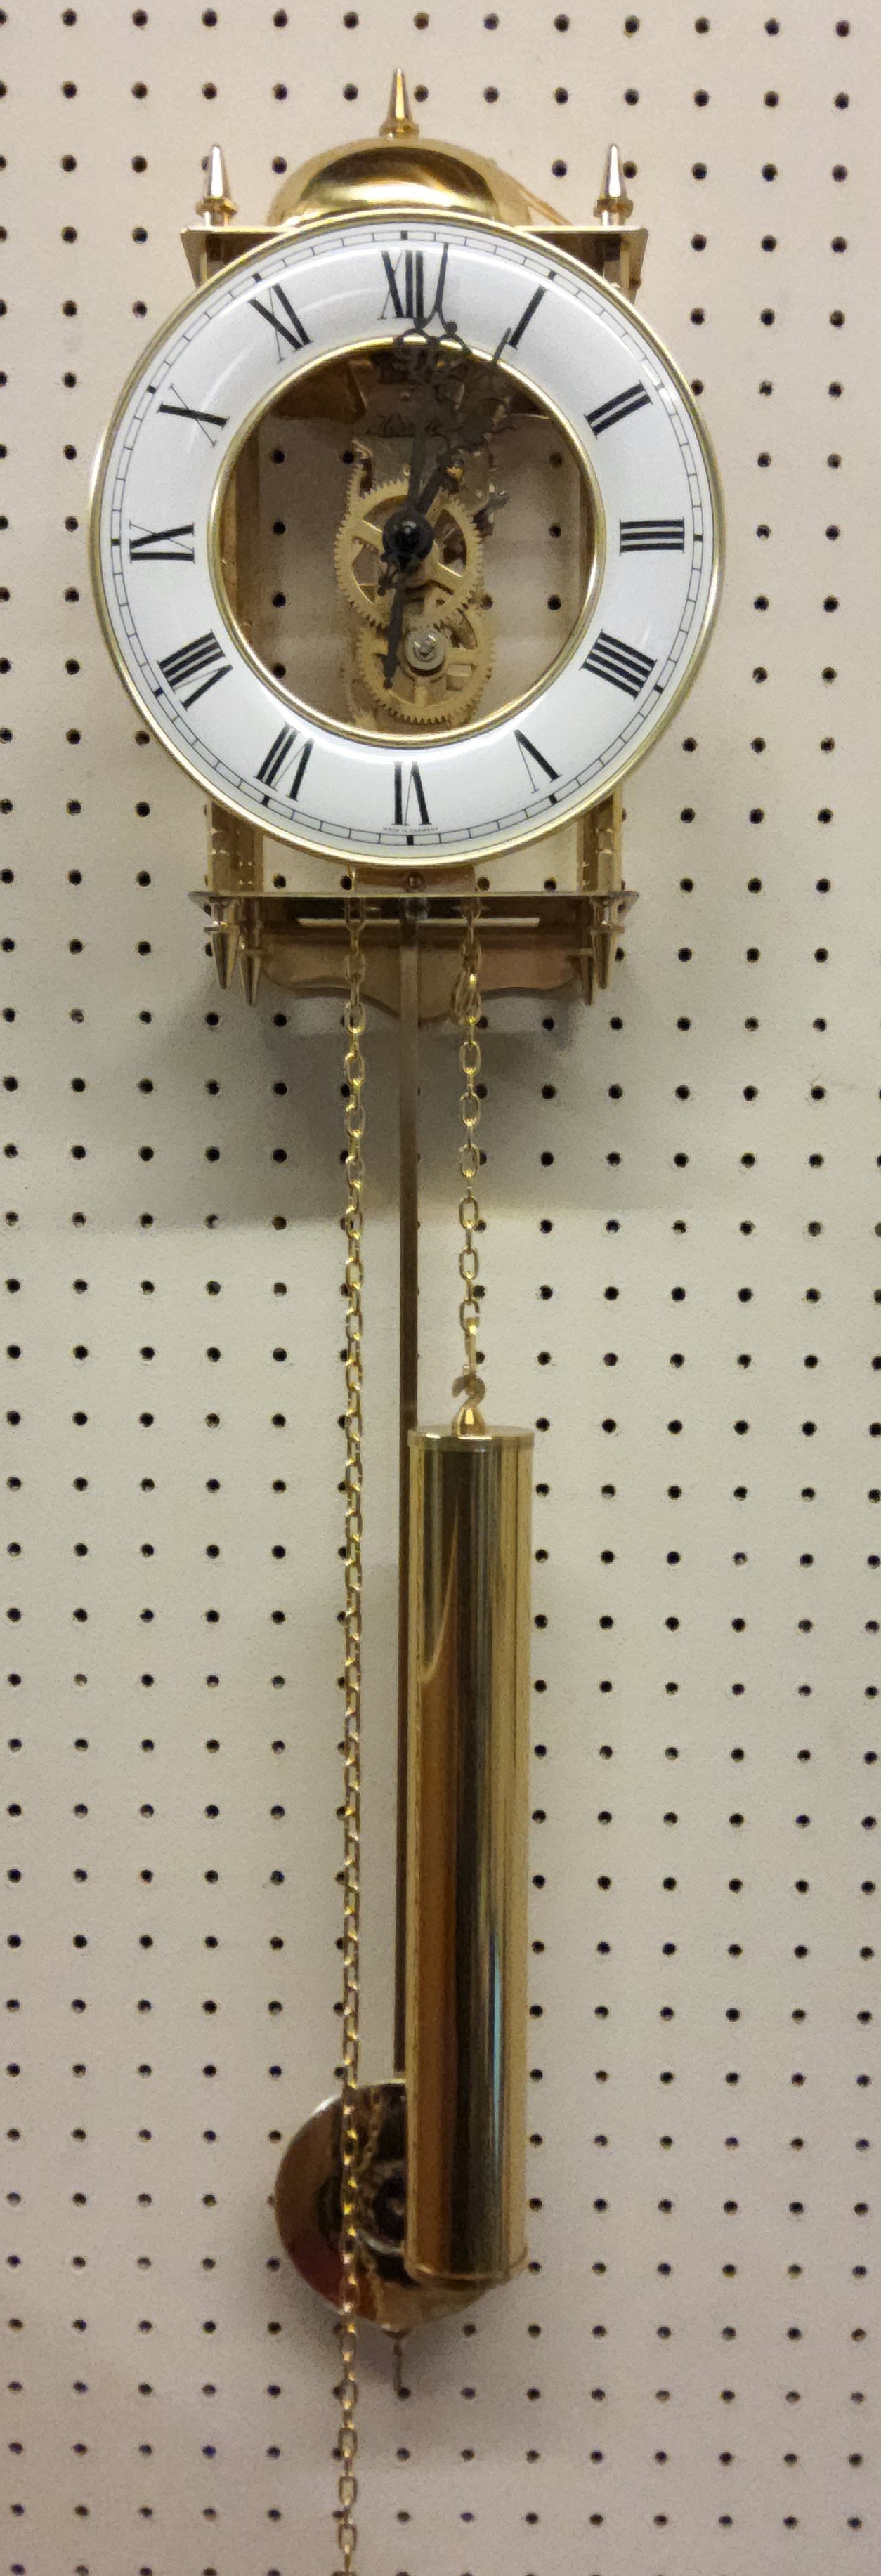 A Franz Hermle brass skeleton wall clock, 8-day chain-driven skeleton movement with a pendulum,